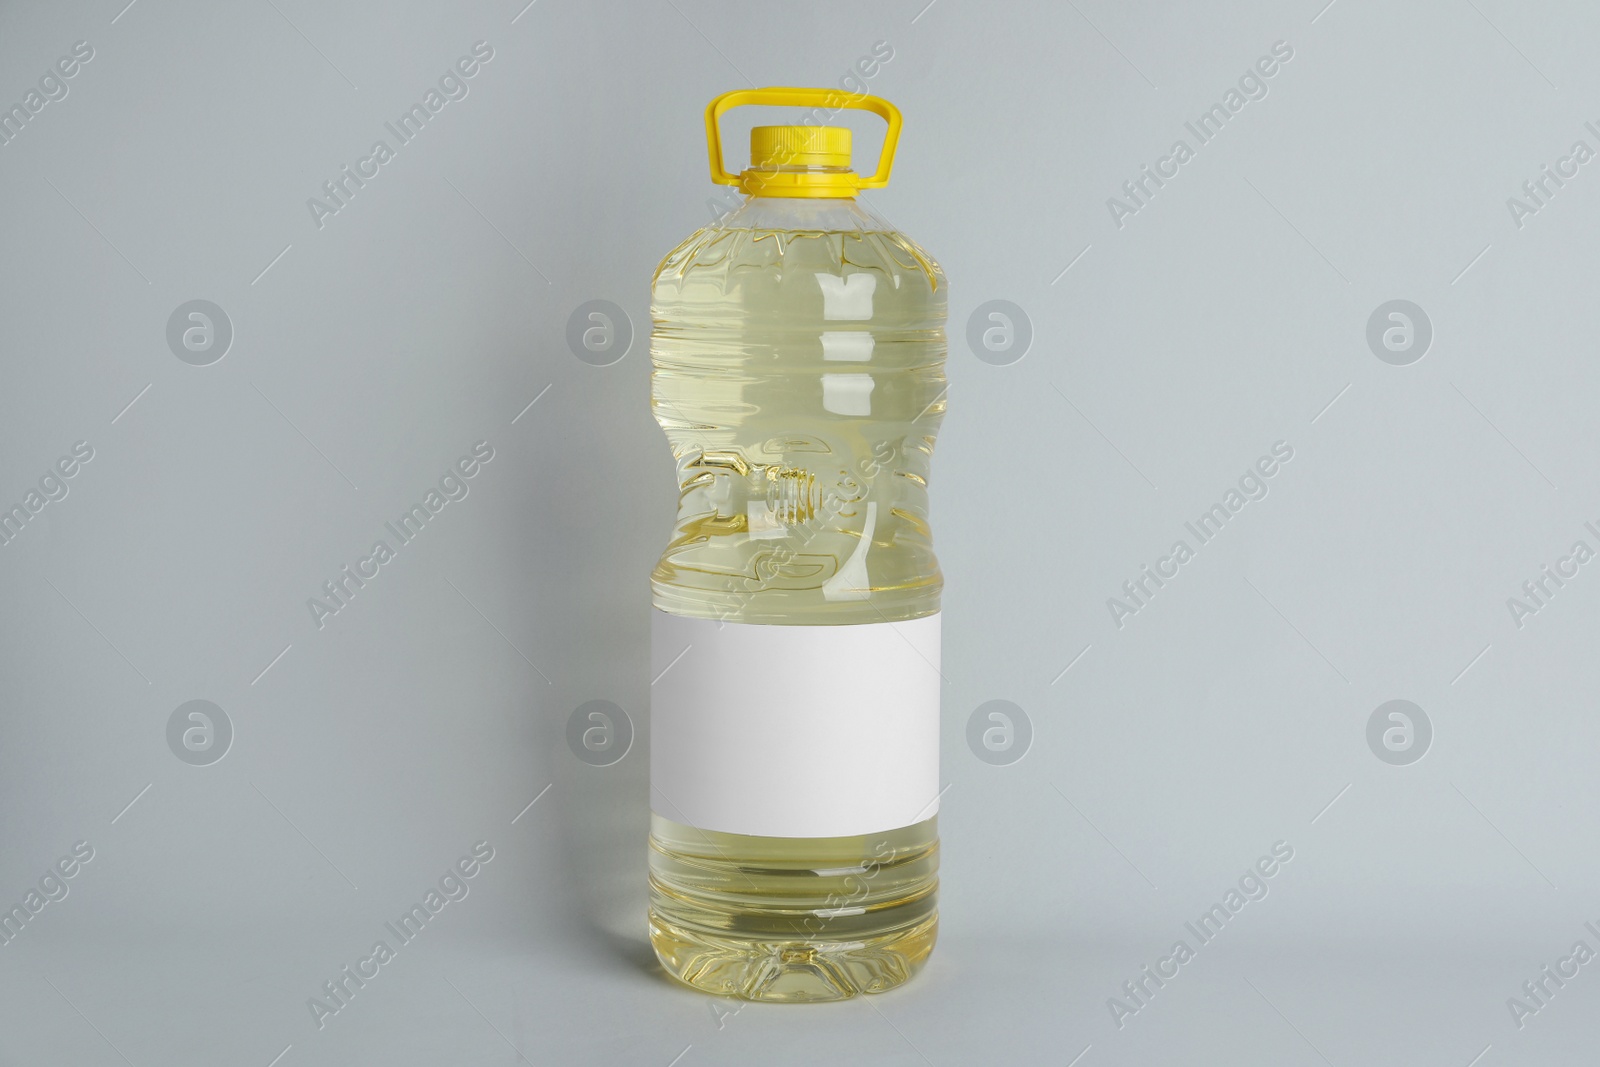 Photo of Bottle of cooking oil on light grey background